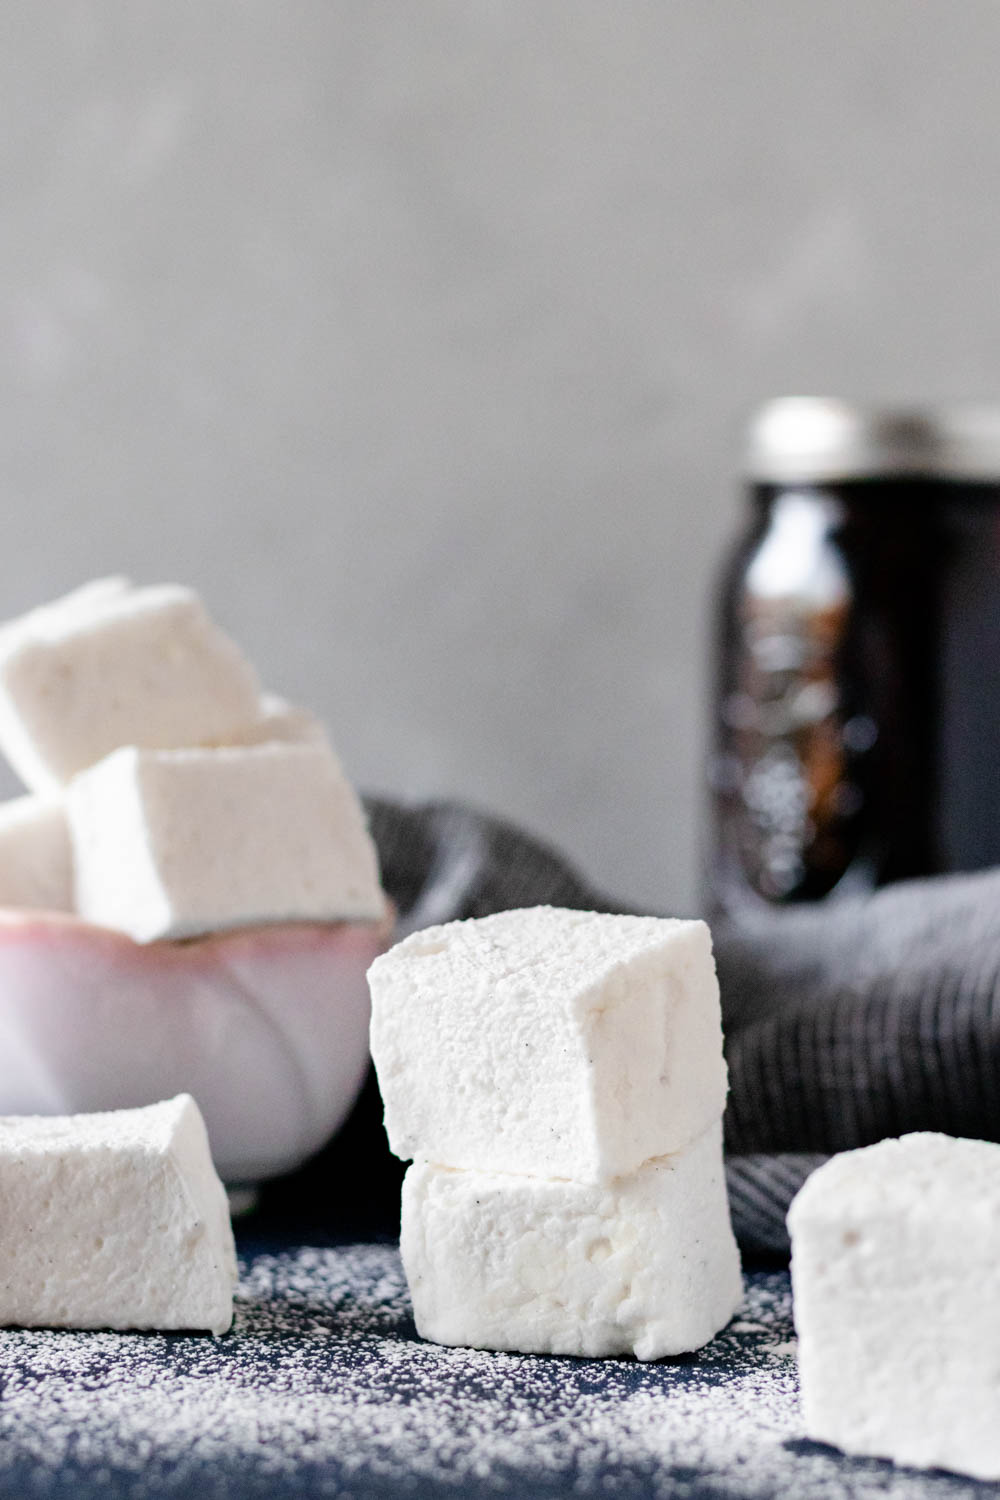 Homemade vanilla marshmallows in a bowl and stacked on a textured kitchen surface 